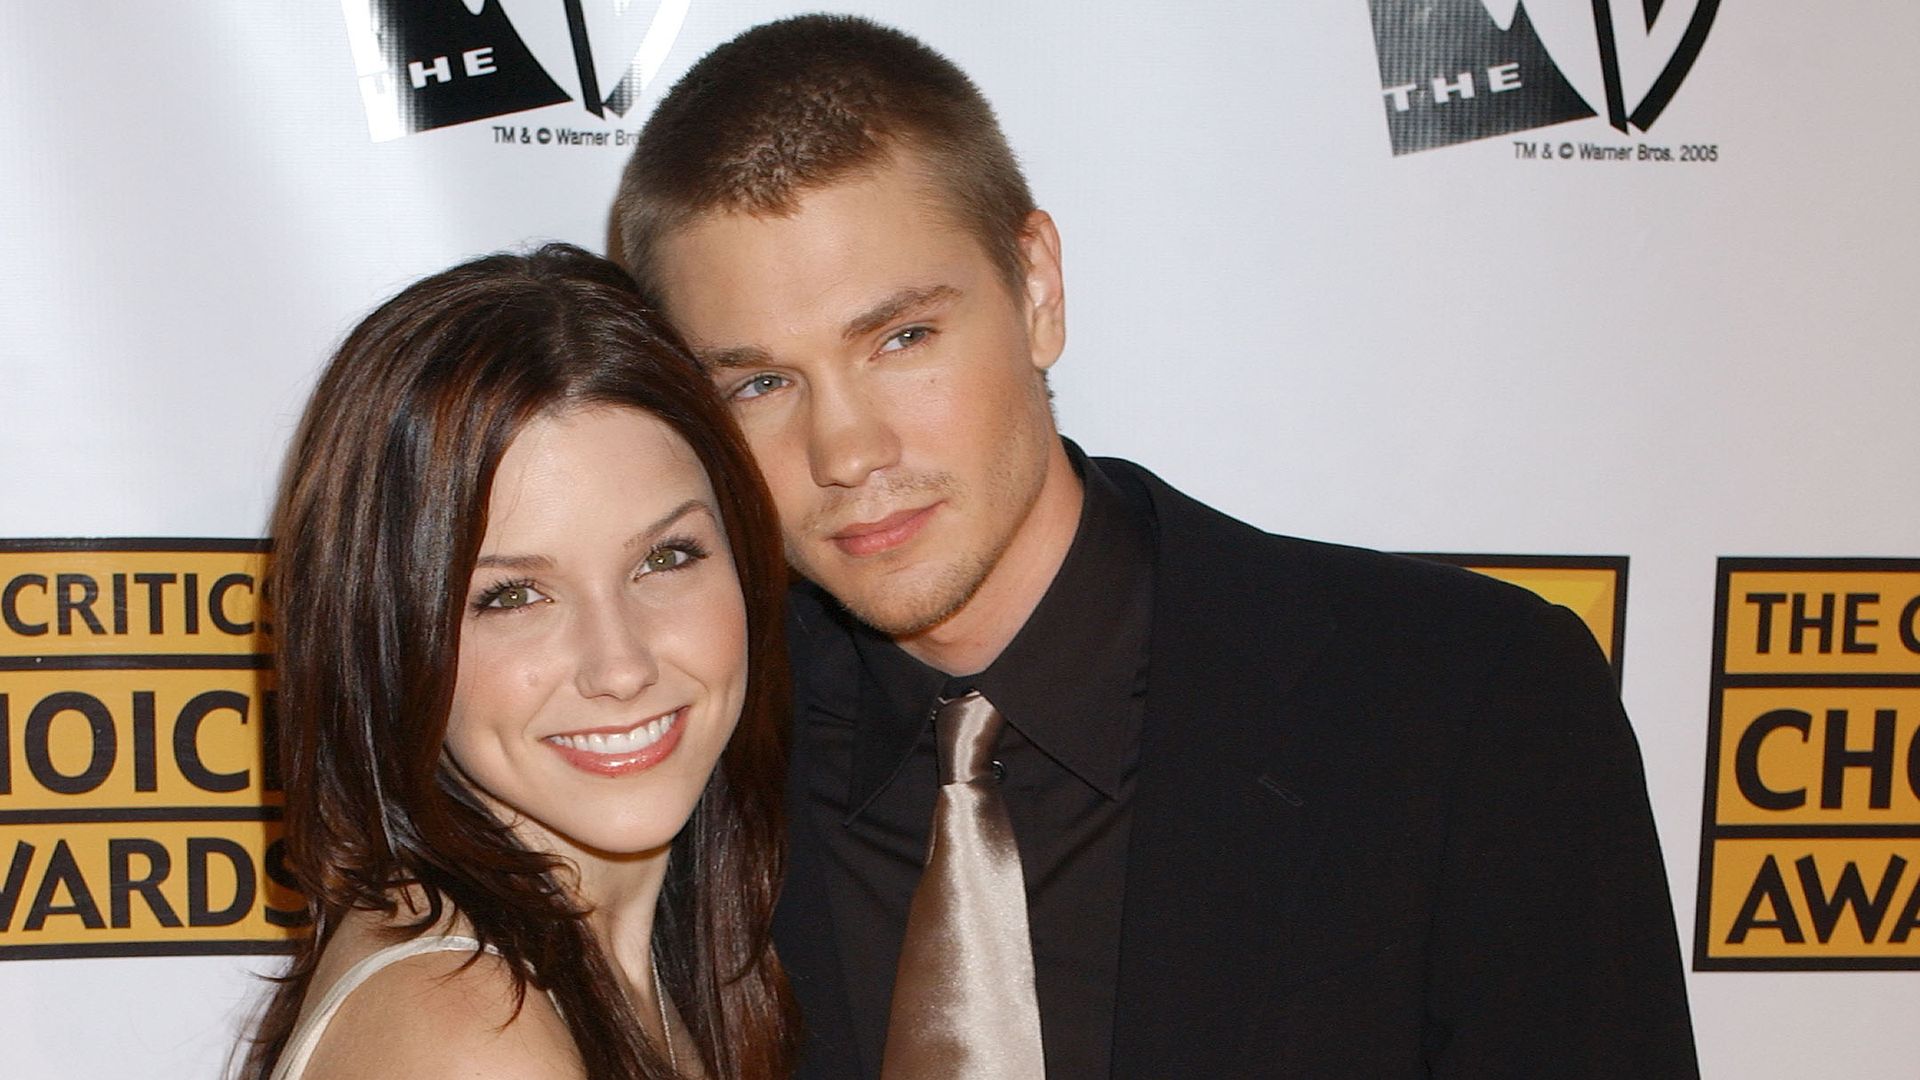 Chad Michael Murray and Sophia Bush during 10th Annual Critics' Choice Awards in Los Angeles on January 10, 2005